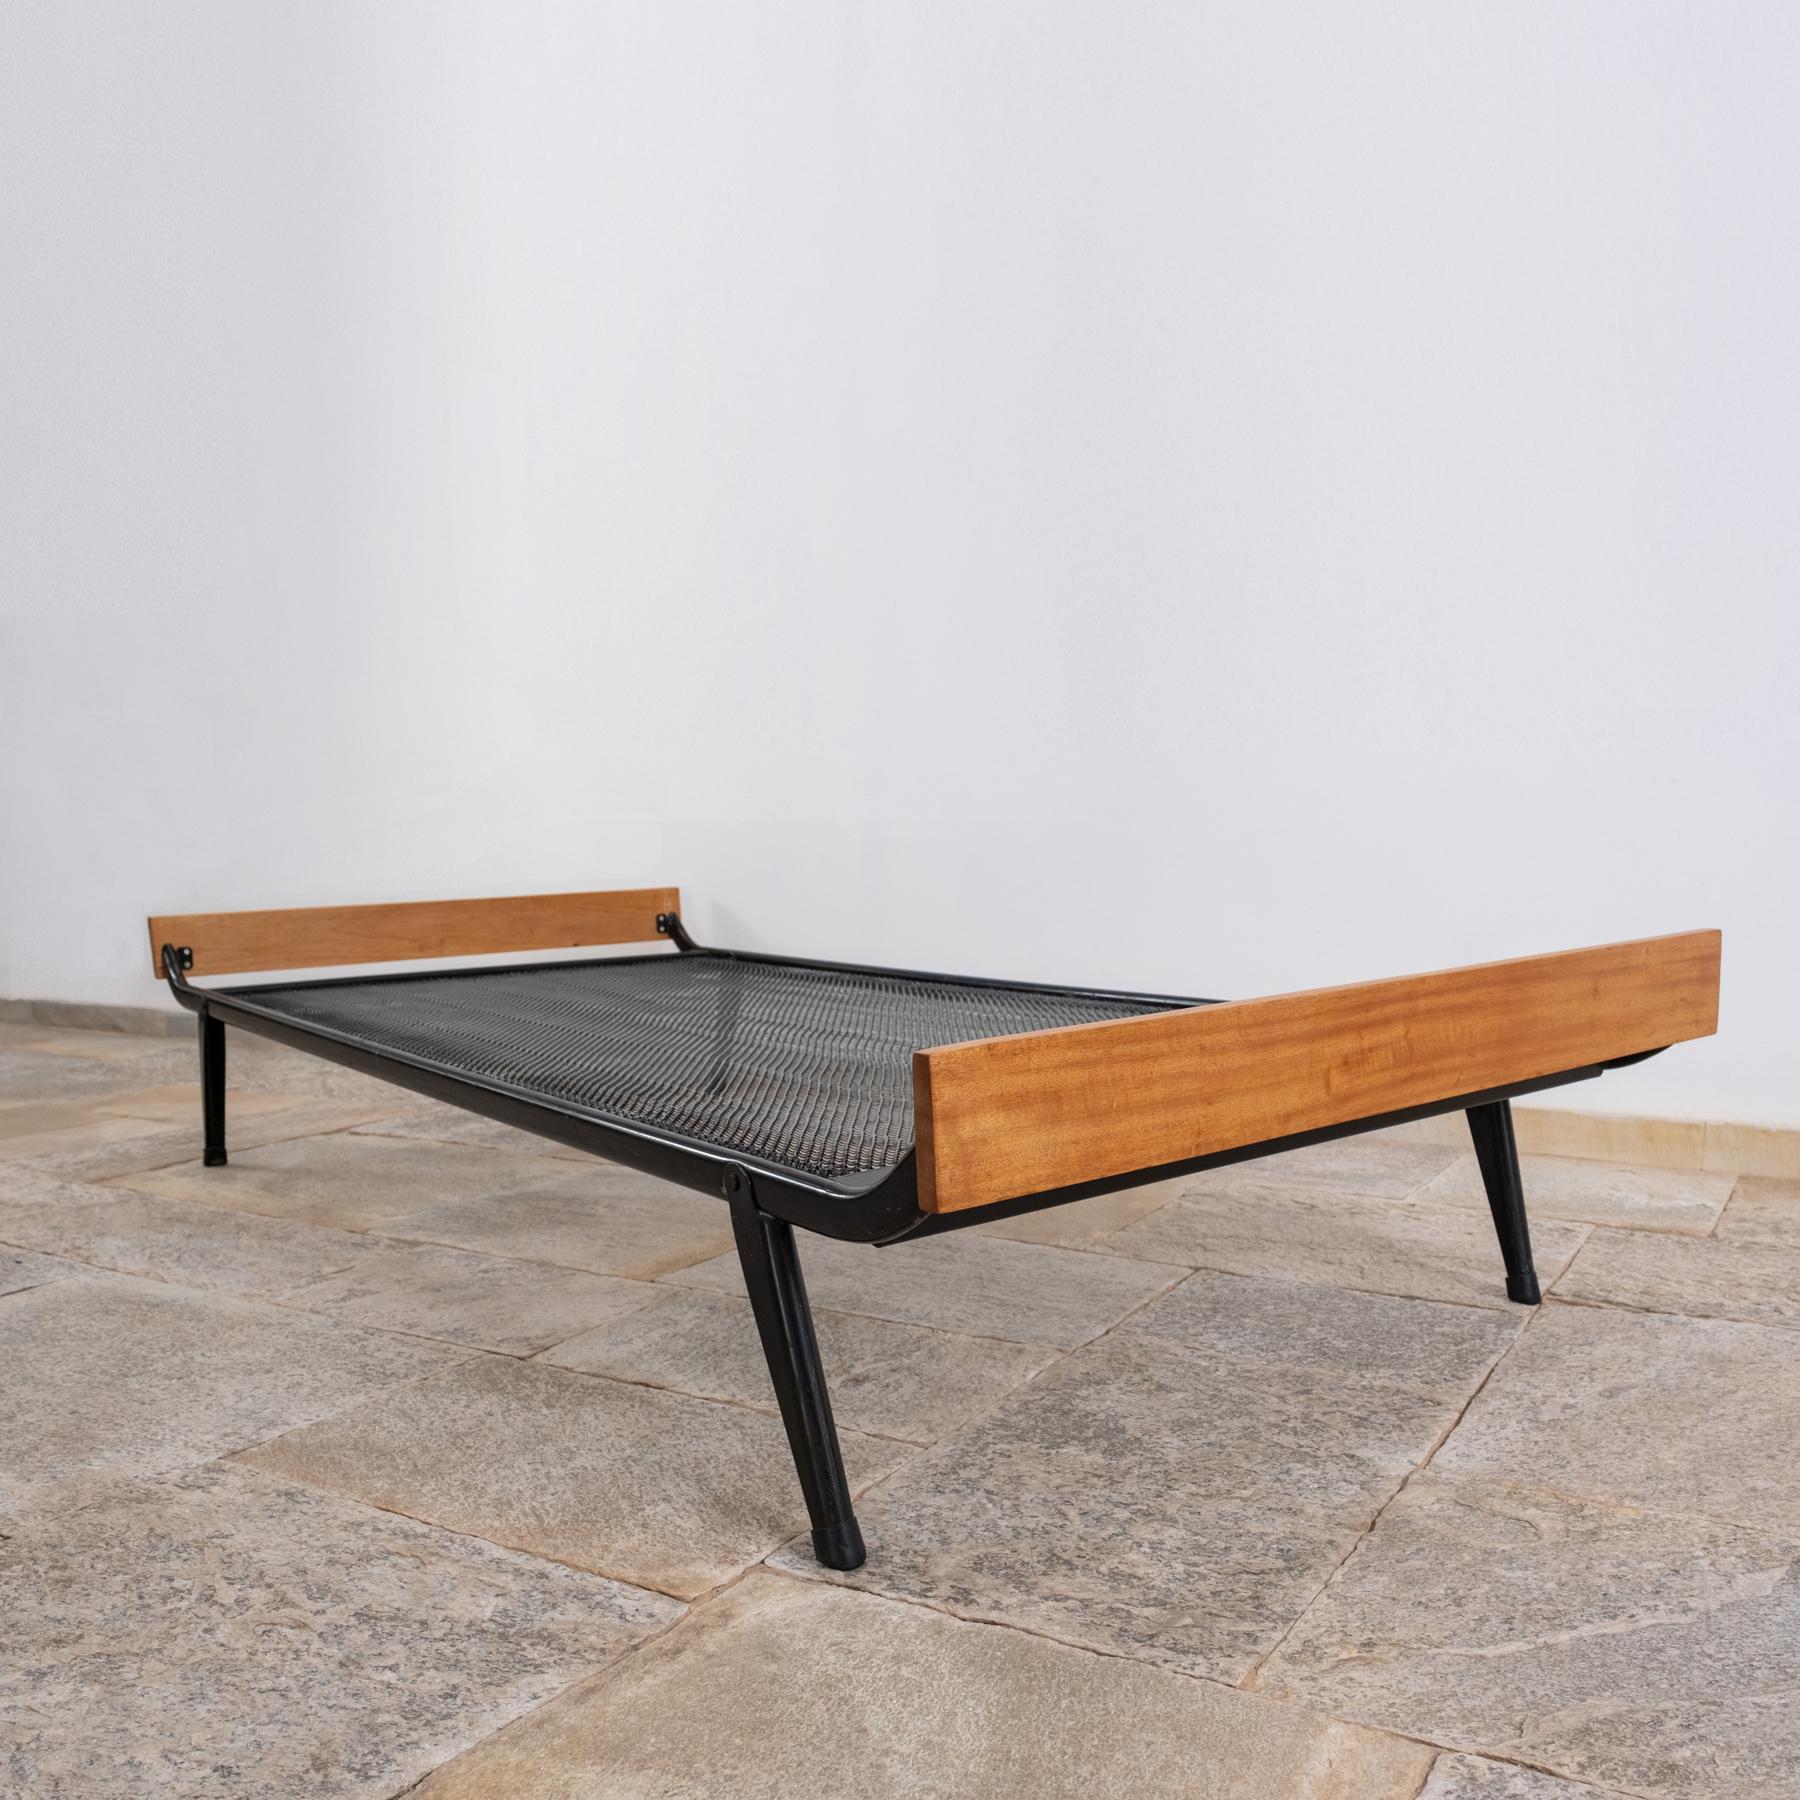 20th Century Daybed by Mertens Jomer, Netherlands 1950/60 For Sale